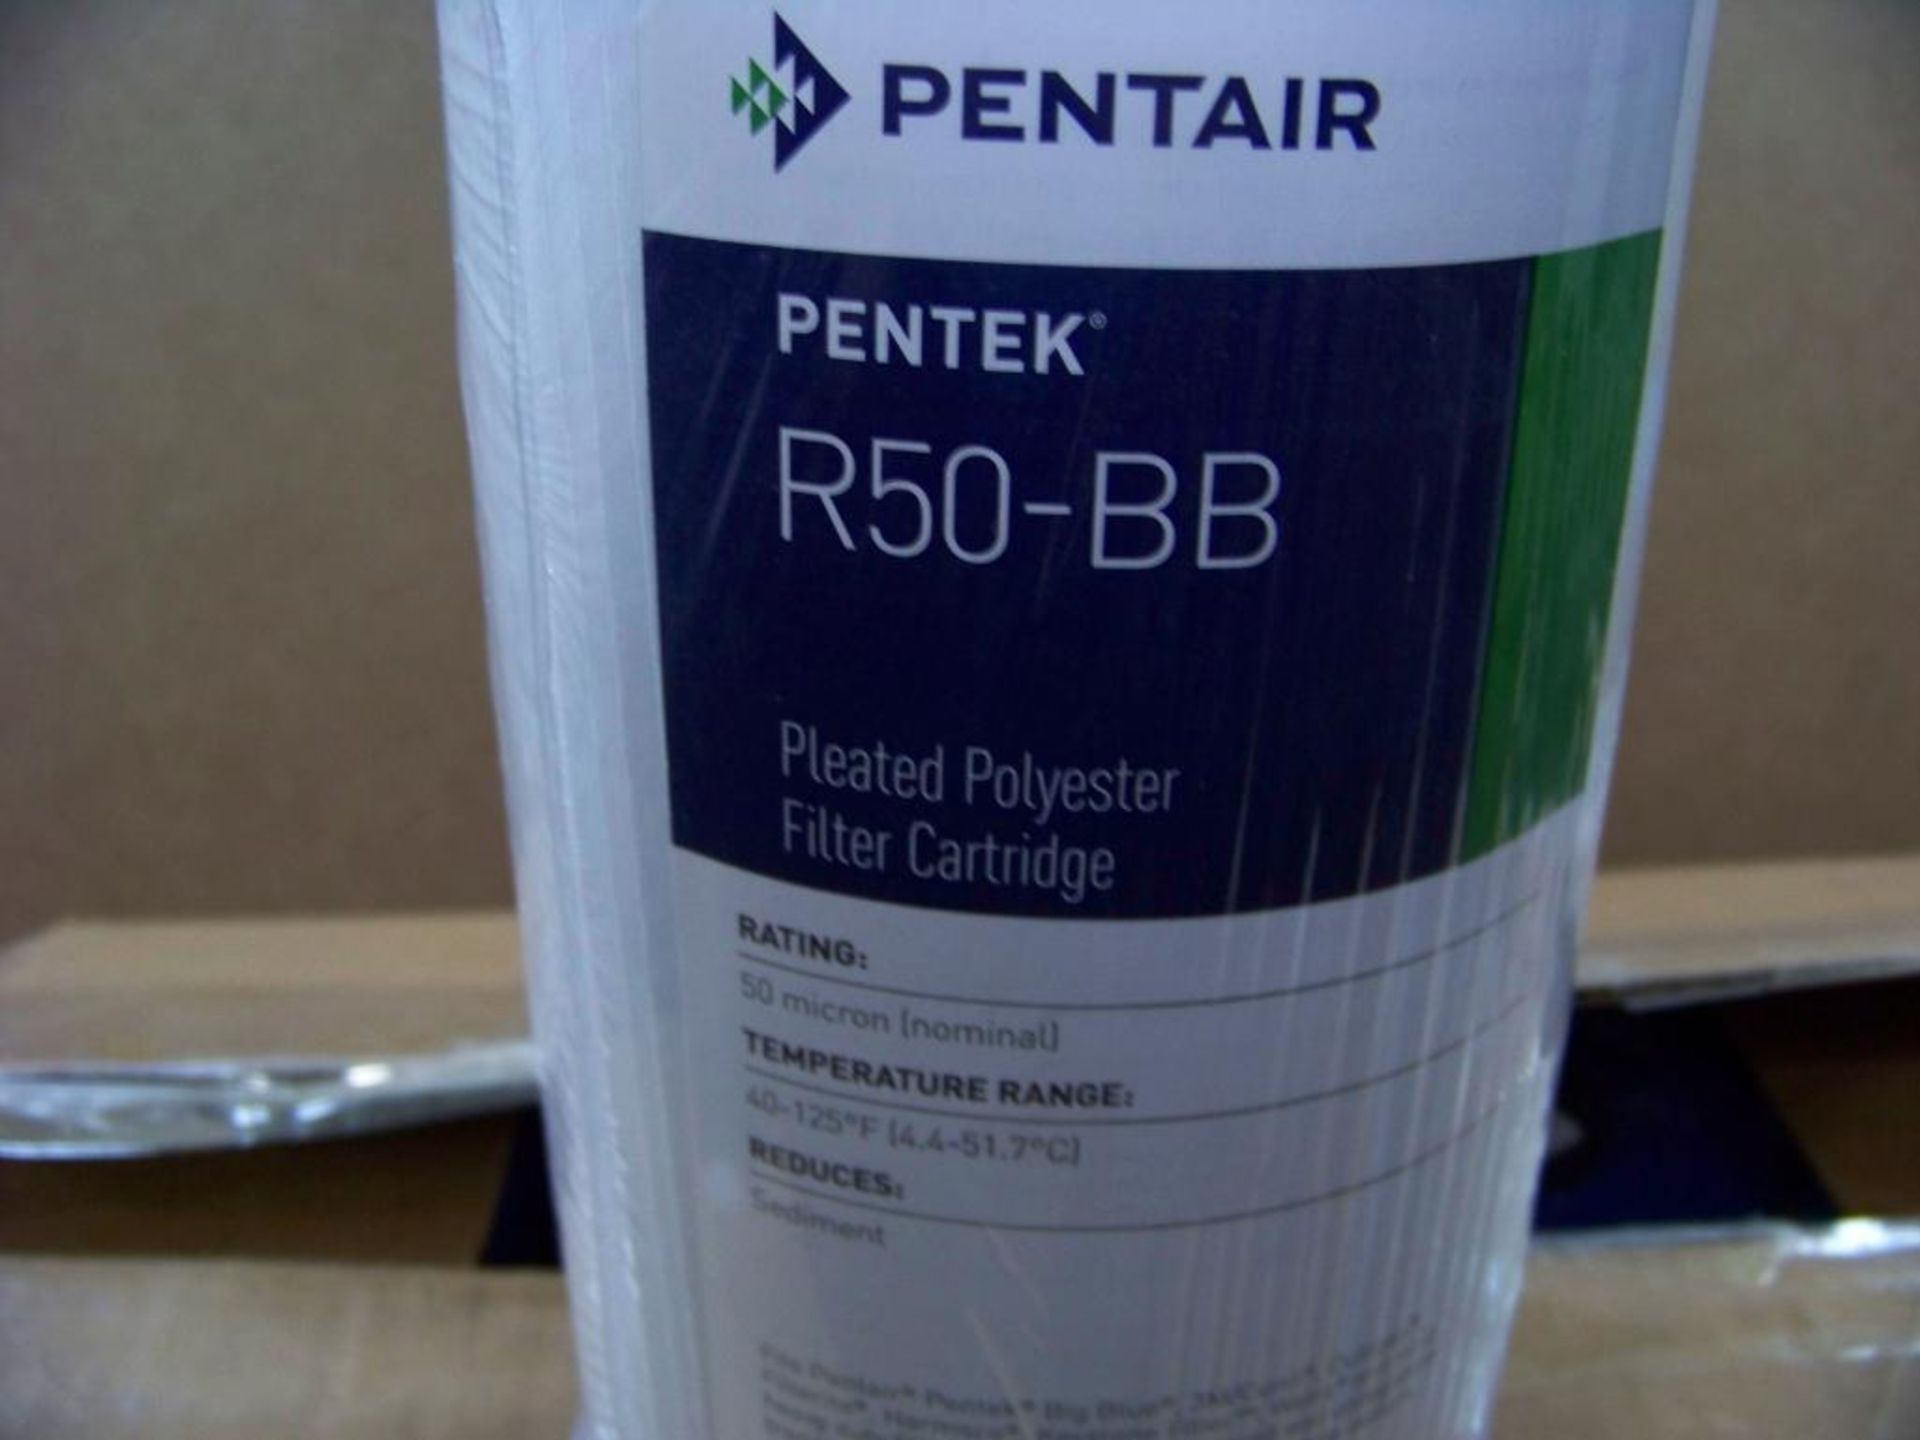 1 CASE OF 8 PENTAIR, PENTEK POLYESTER FILTER CARTRIDGES, PLEATED, # R50-BB "NEW" - Image 3 of 5